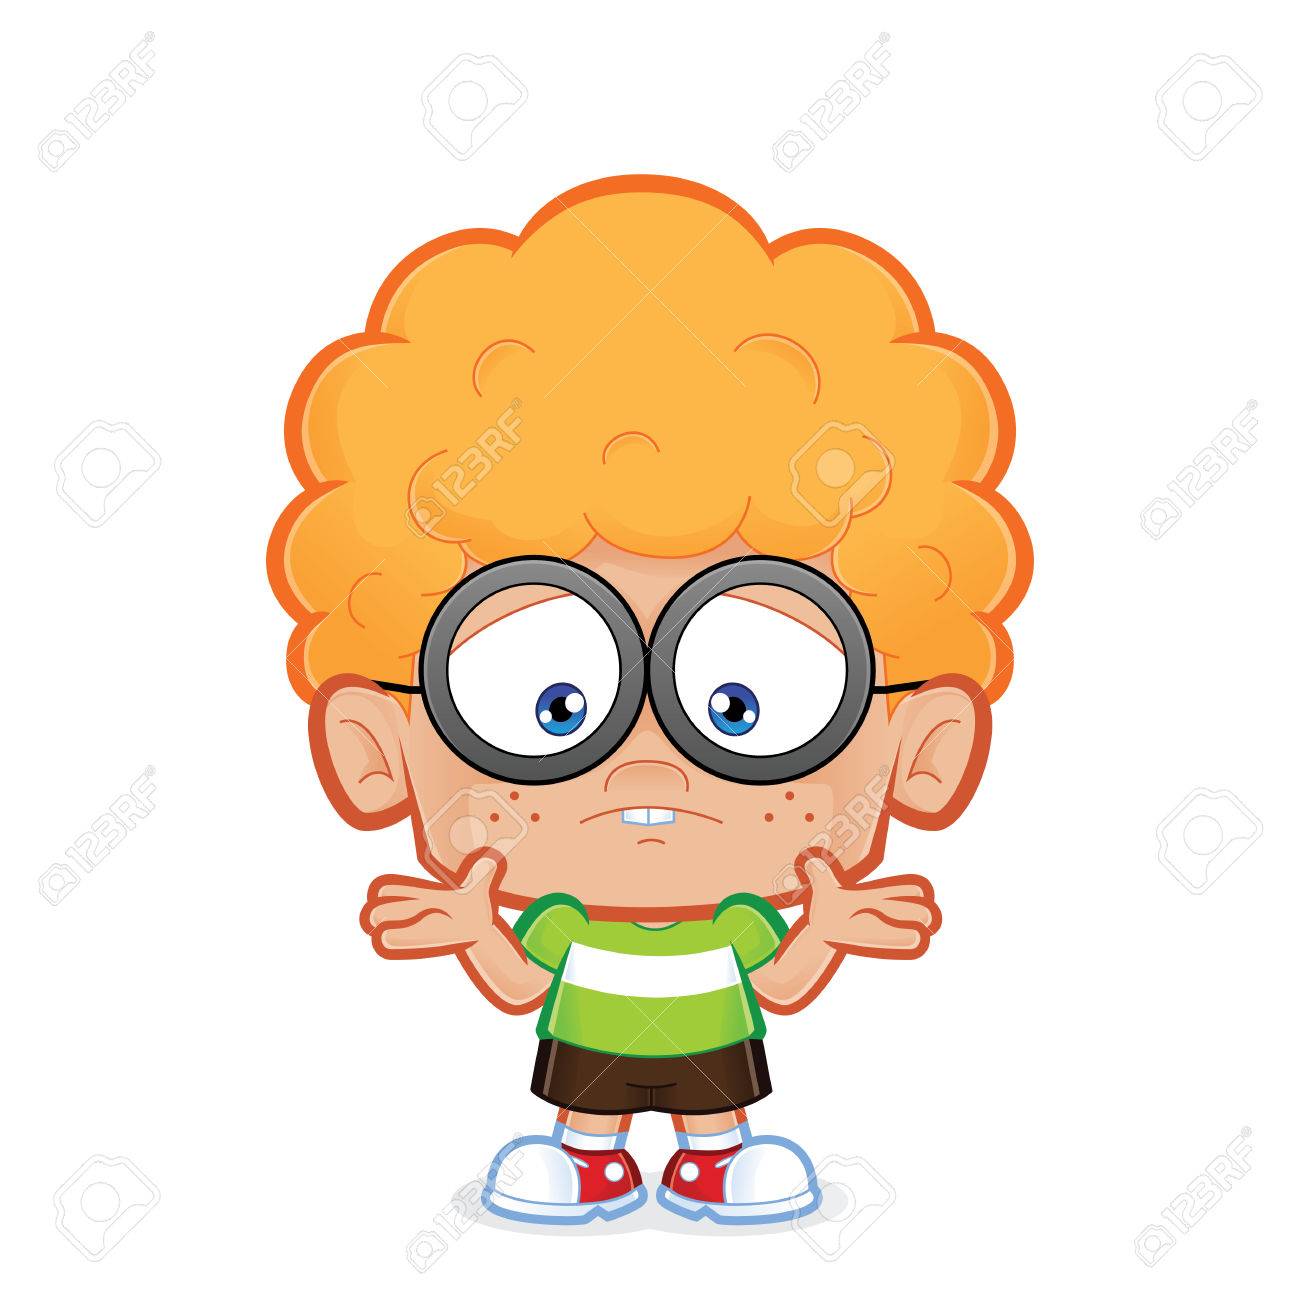 Boy confused clipart 9 » Clipart Station.